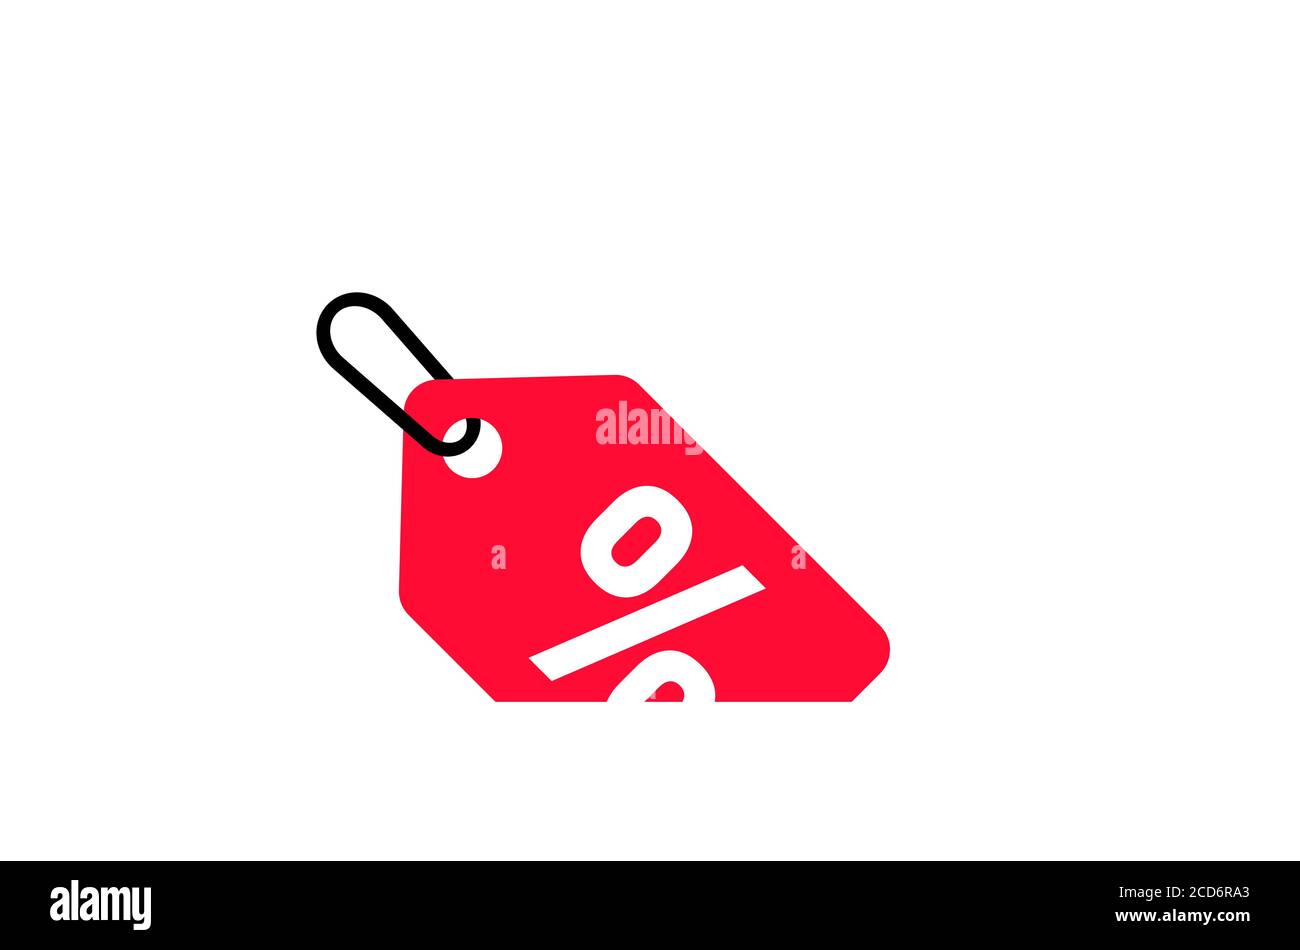 price stickers isolated on white background Stock Photo - Alamy